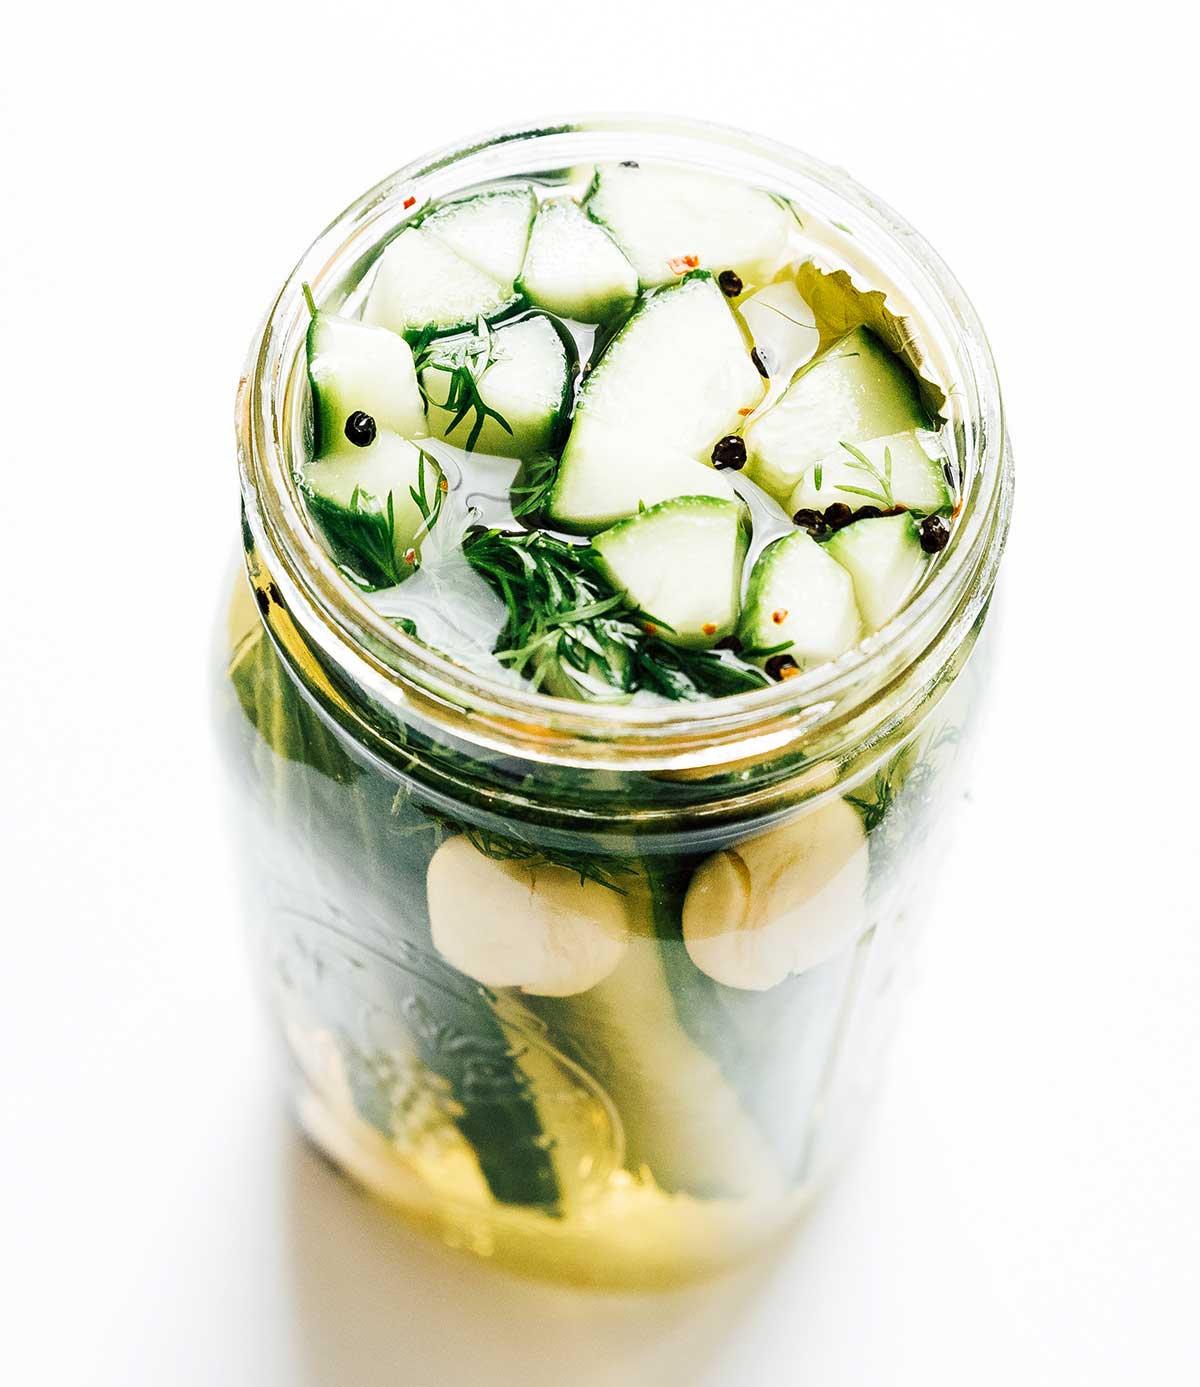 A mason jar filled with cucumber wedges, a water and vinegar pickling mixture, and various spices